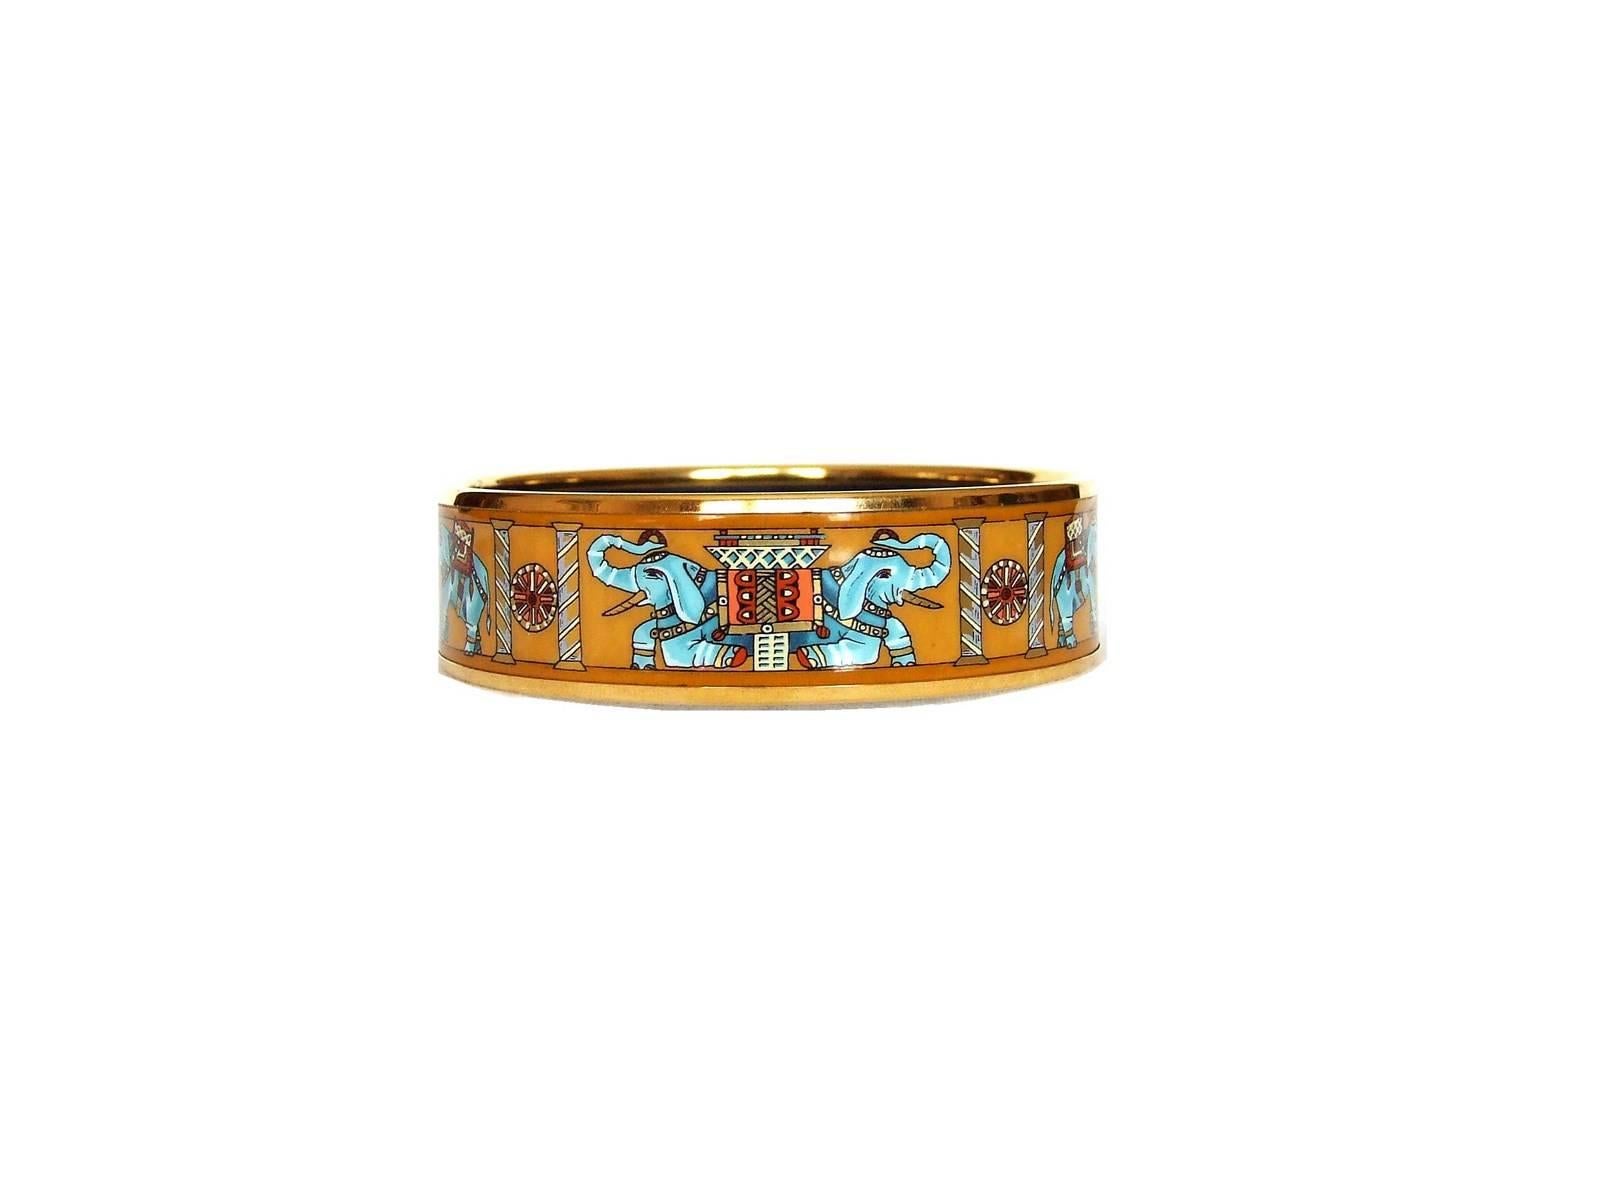 GORGEOUS AUTHENTIC HERMES BRACELET

Pattern: Torana (Elephants)

Made in Austria +Z

Made of Enamel Printed and Gold Plated Hardware

Colors: Yellow Background, Turquoise Blue Elephants, Gilded columns. Inside is black. 

